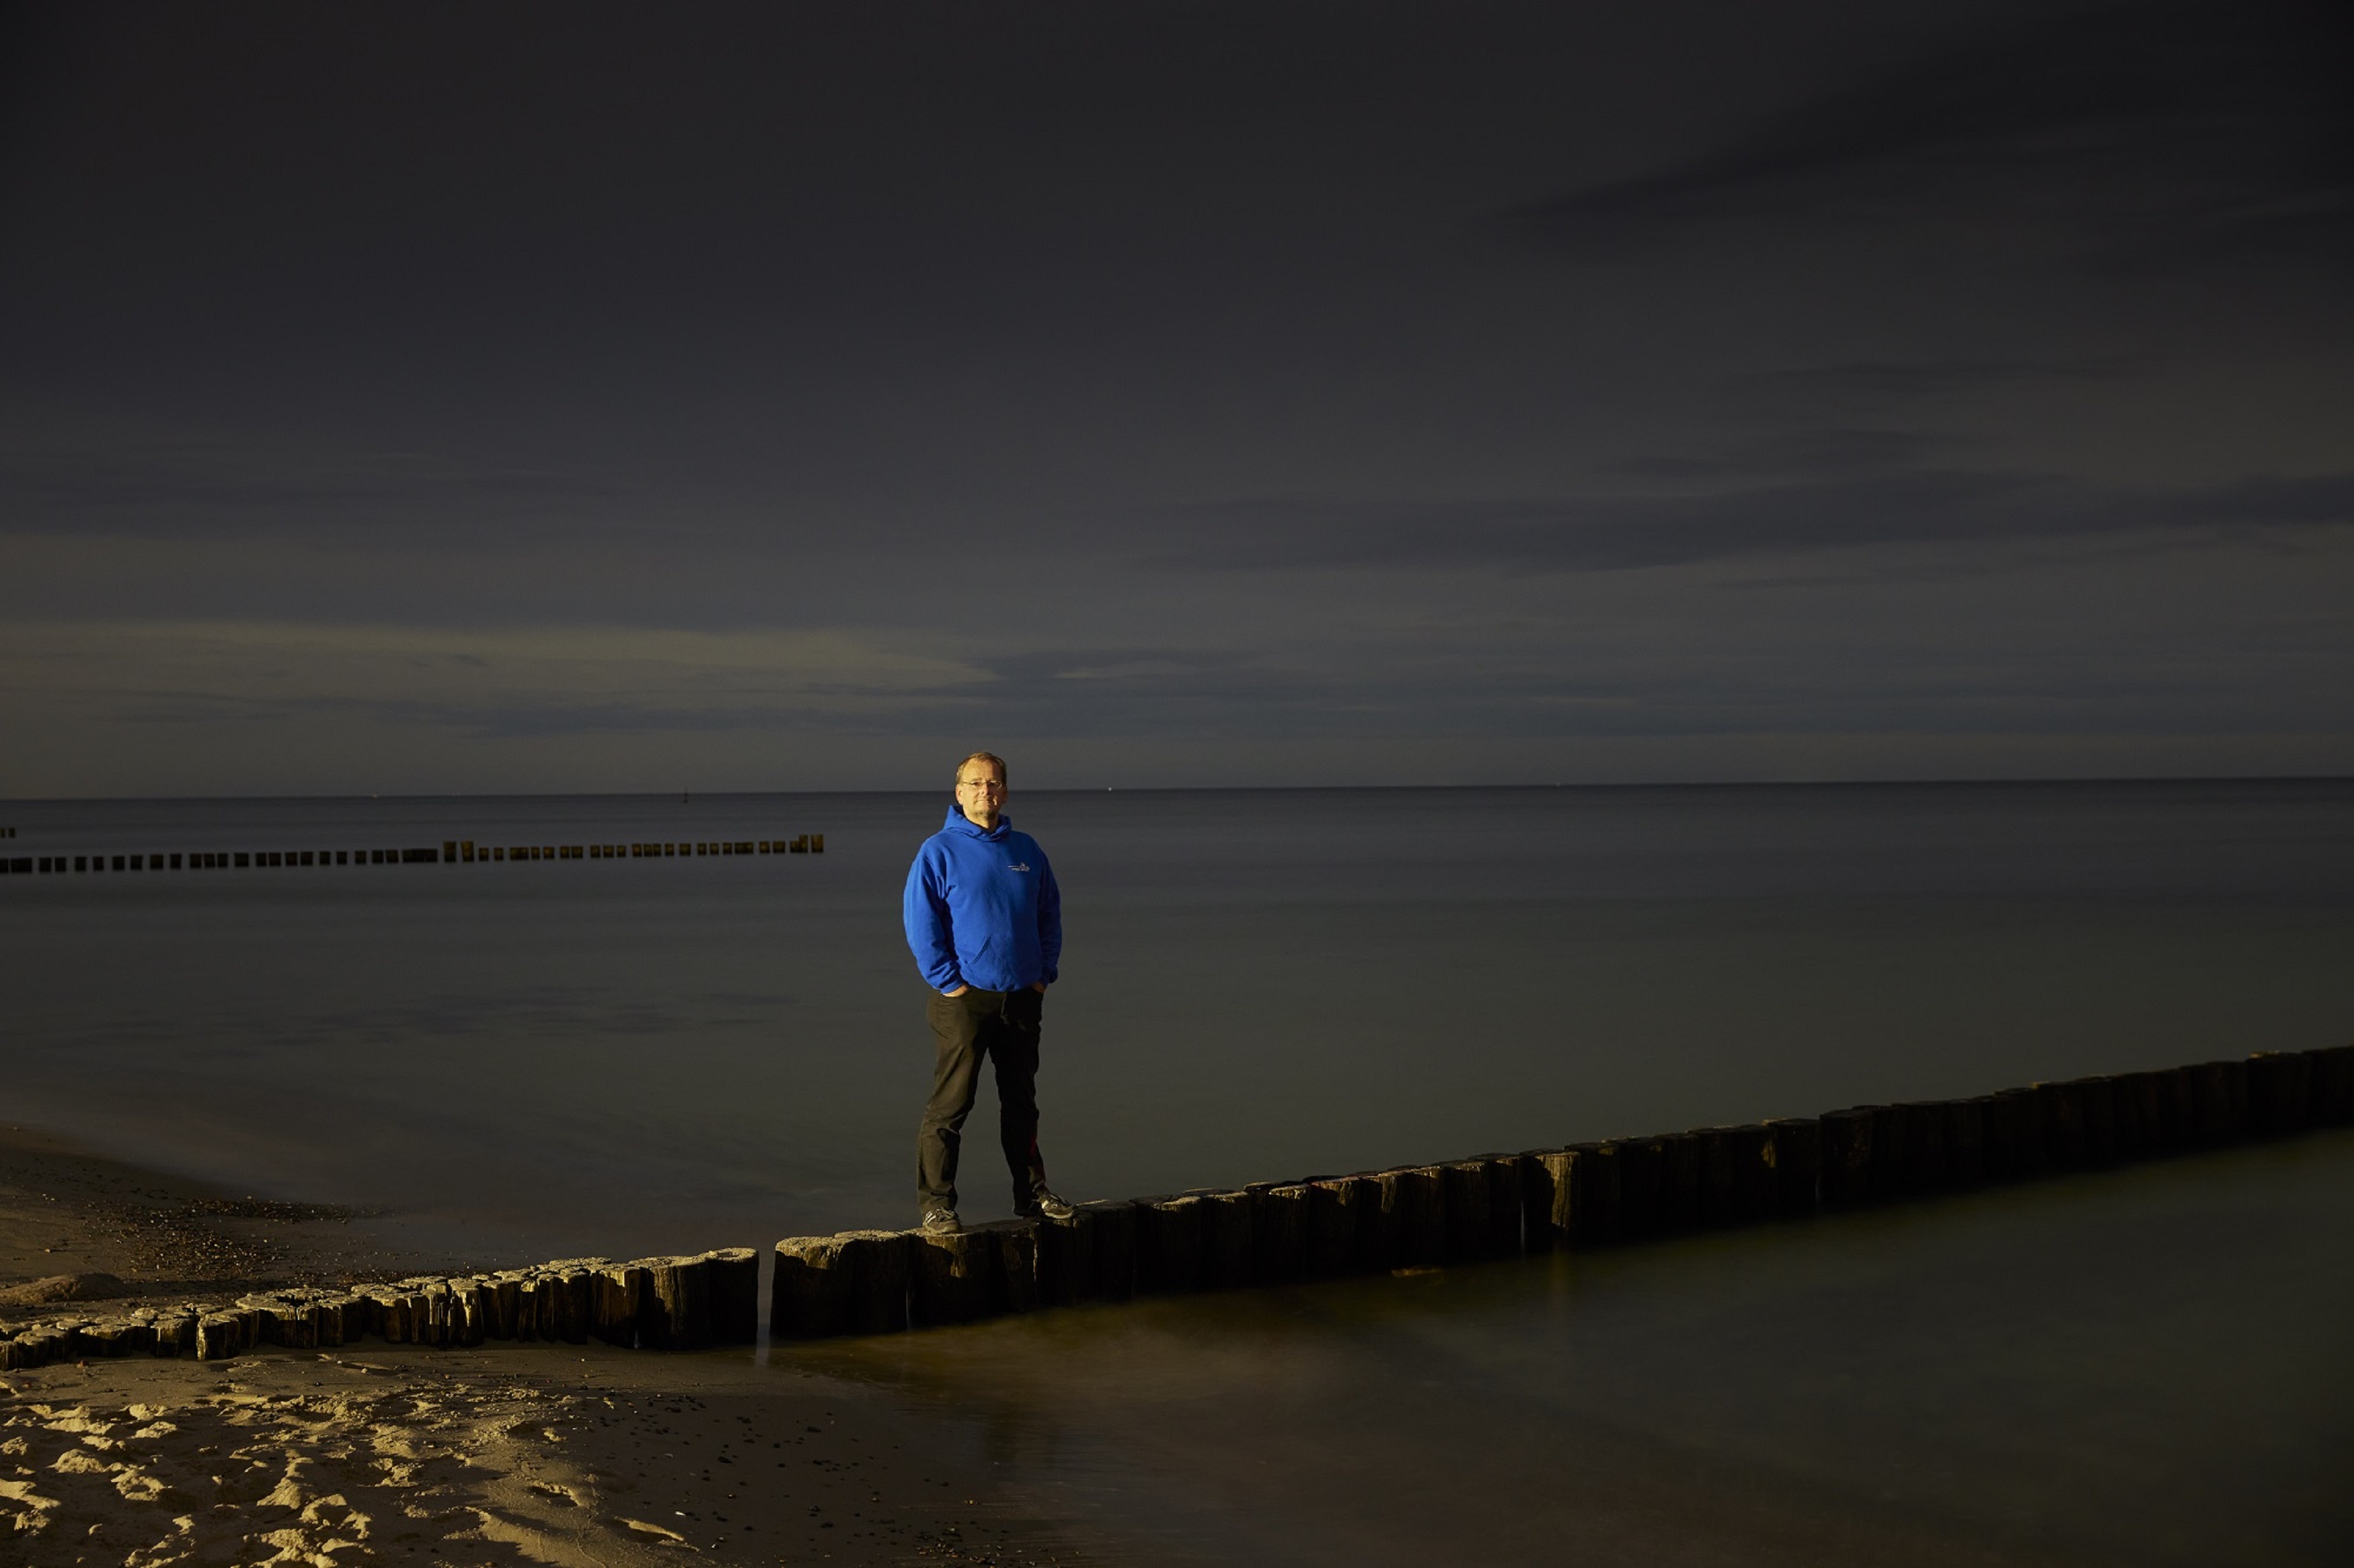 At the Leibniz Institute for Atmospheric Physics in Kühlungsborn on the Baltic Sea, Josef Höffner studies the different layers of the atmosphere.